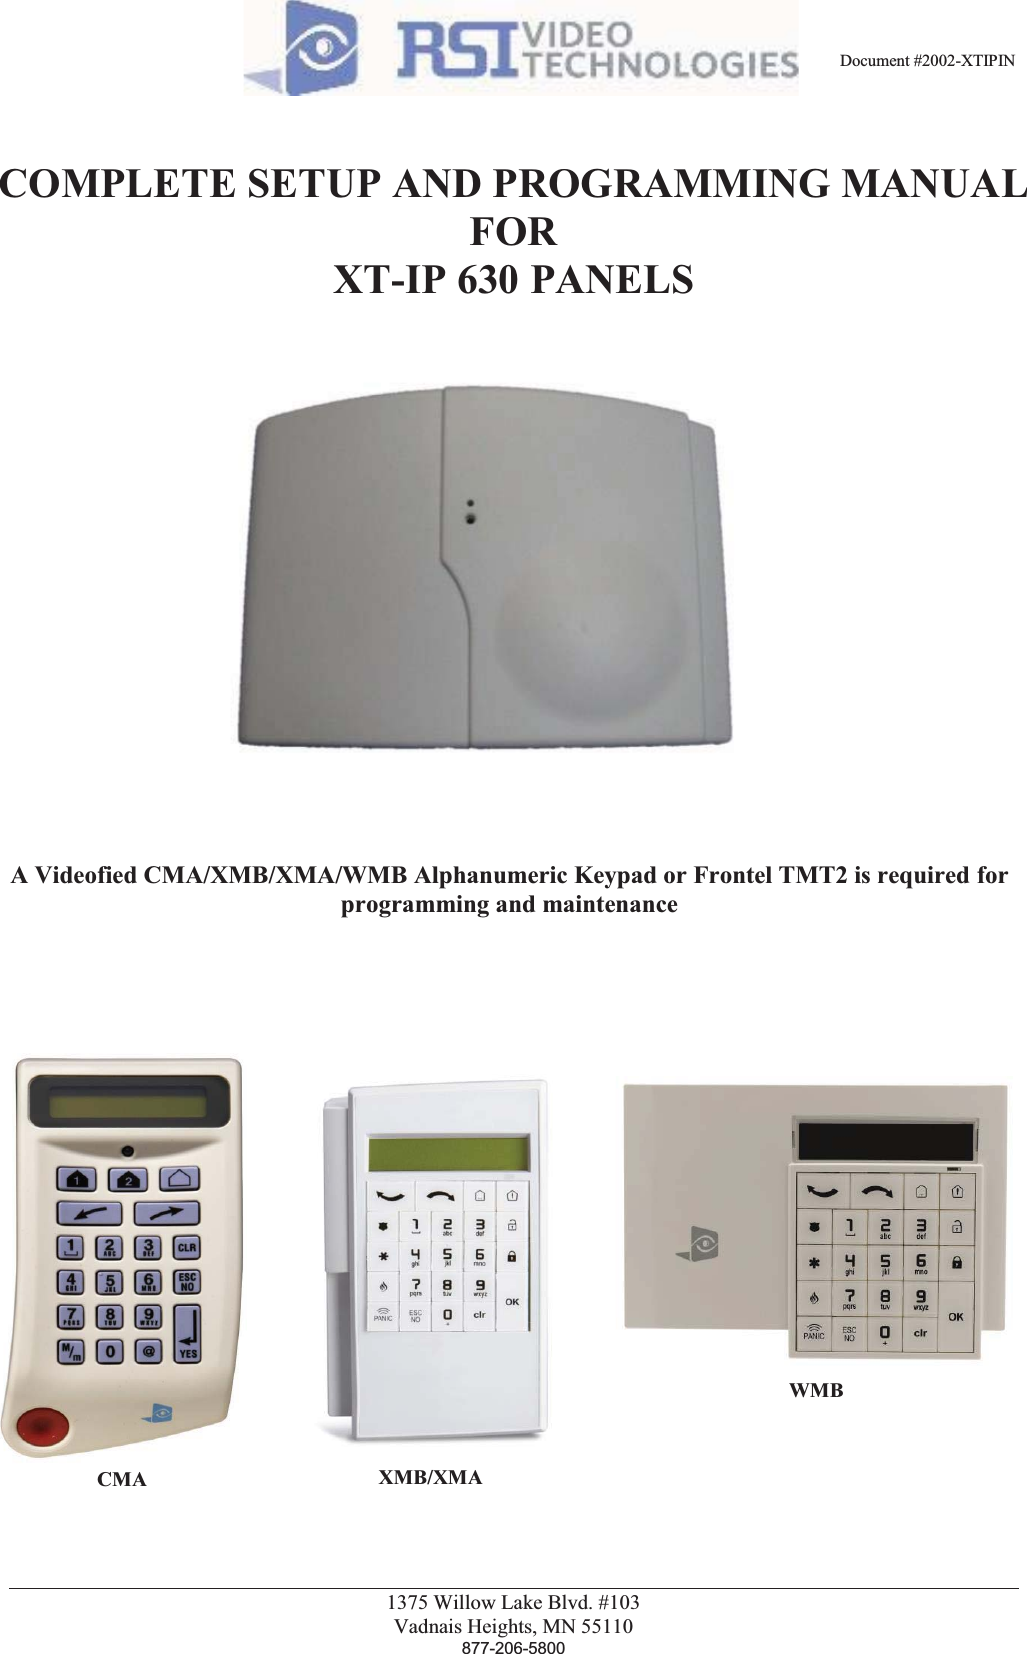 Document #2002-XTIPIN 1375 Willow Lake Blvd. #103 Vadnais Heights, MN 55110 877-206-5800    COMPLETE SETUP AND PROGRAMMING MANUAL FOR XT-IP 630 PANELS  A Videofied CMA/XMB/XMA/WMB Alphanumeric Keypad or Frontel TMT2 is required for programming and maintenance CMA XMB/XMA WMB 